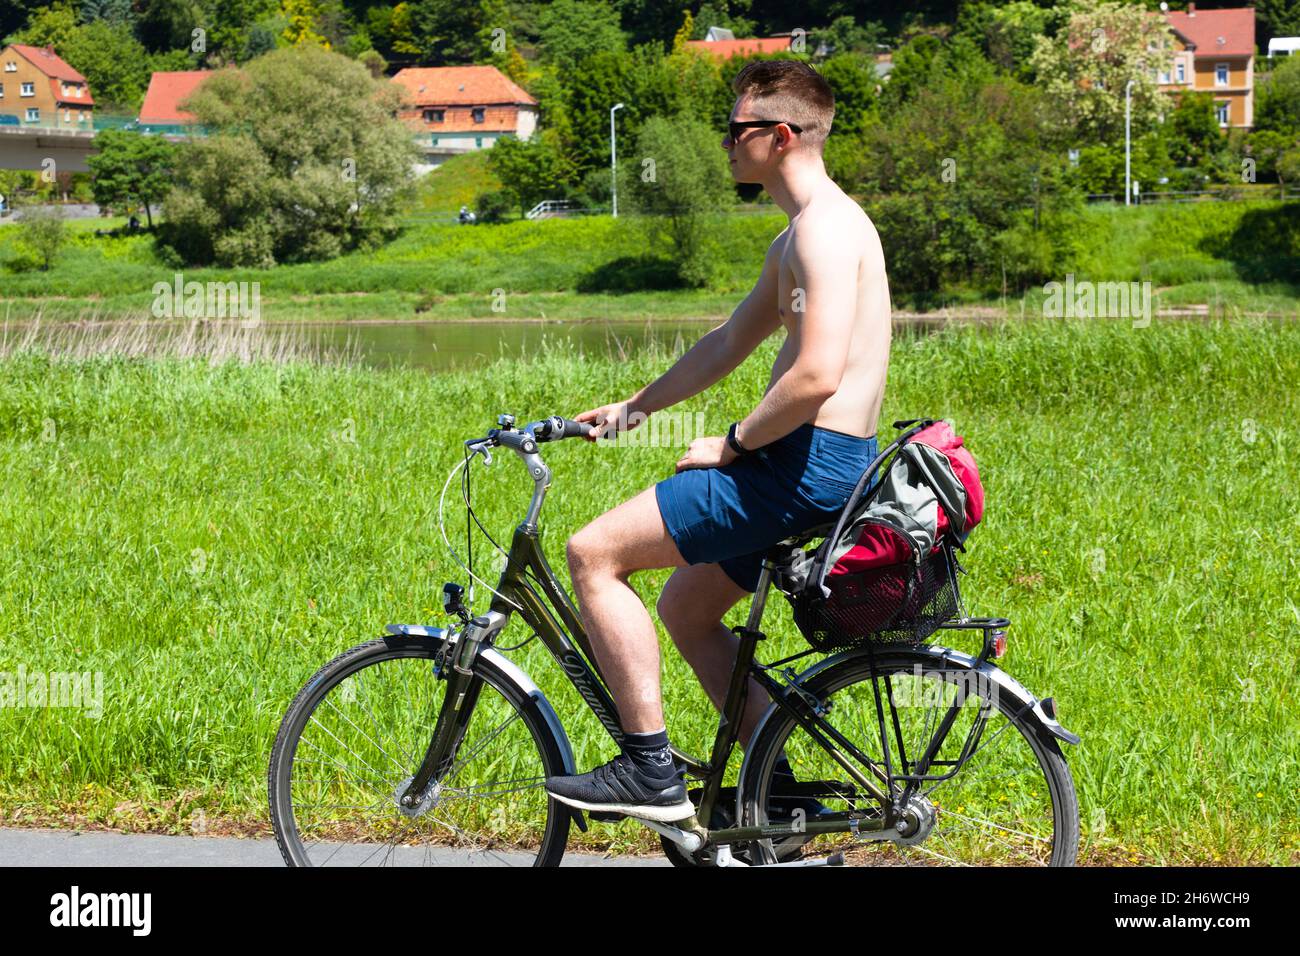 Young man riding a bicycle in summer Germany biker cycling Stock Photo